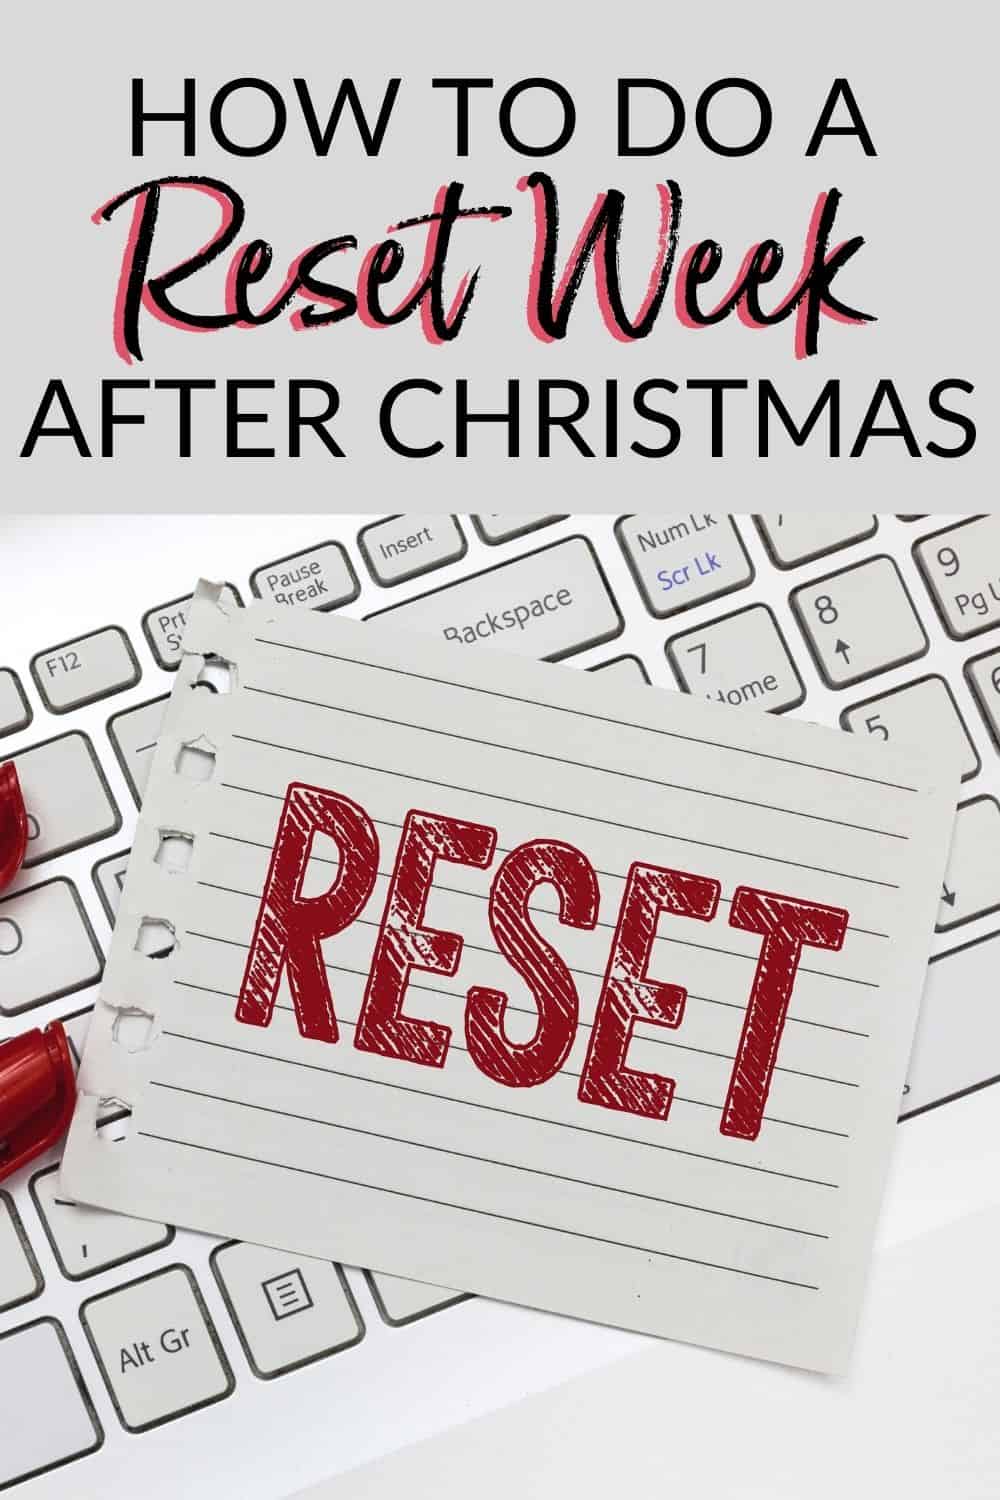 text - how to do a reset week after Christmas image of paper that has word reset written on it in red marker atop a white desk and keyboard